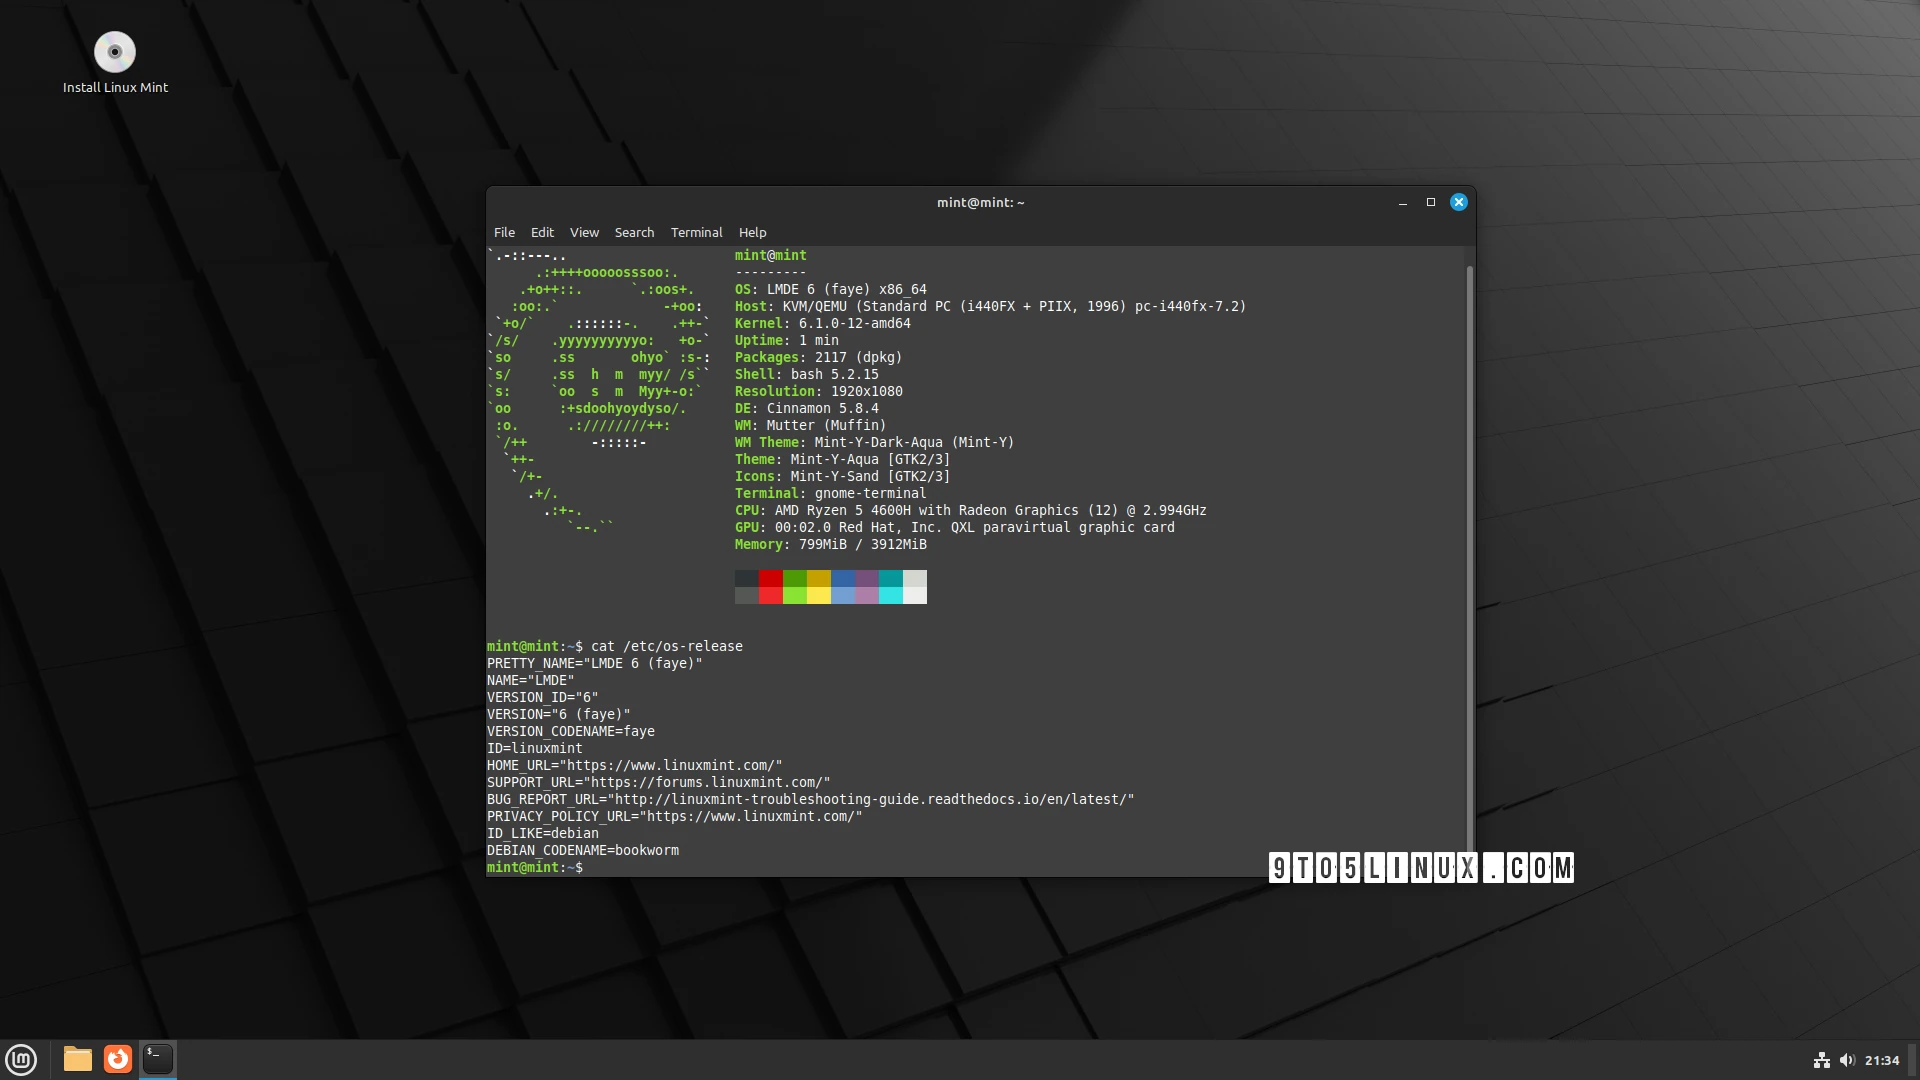 LMDE (Linux Mint Debian Edition) 6 “Faye” Is Now Available for Download